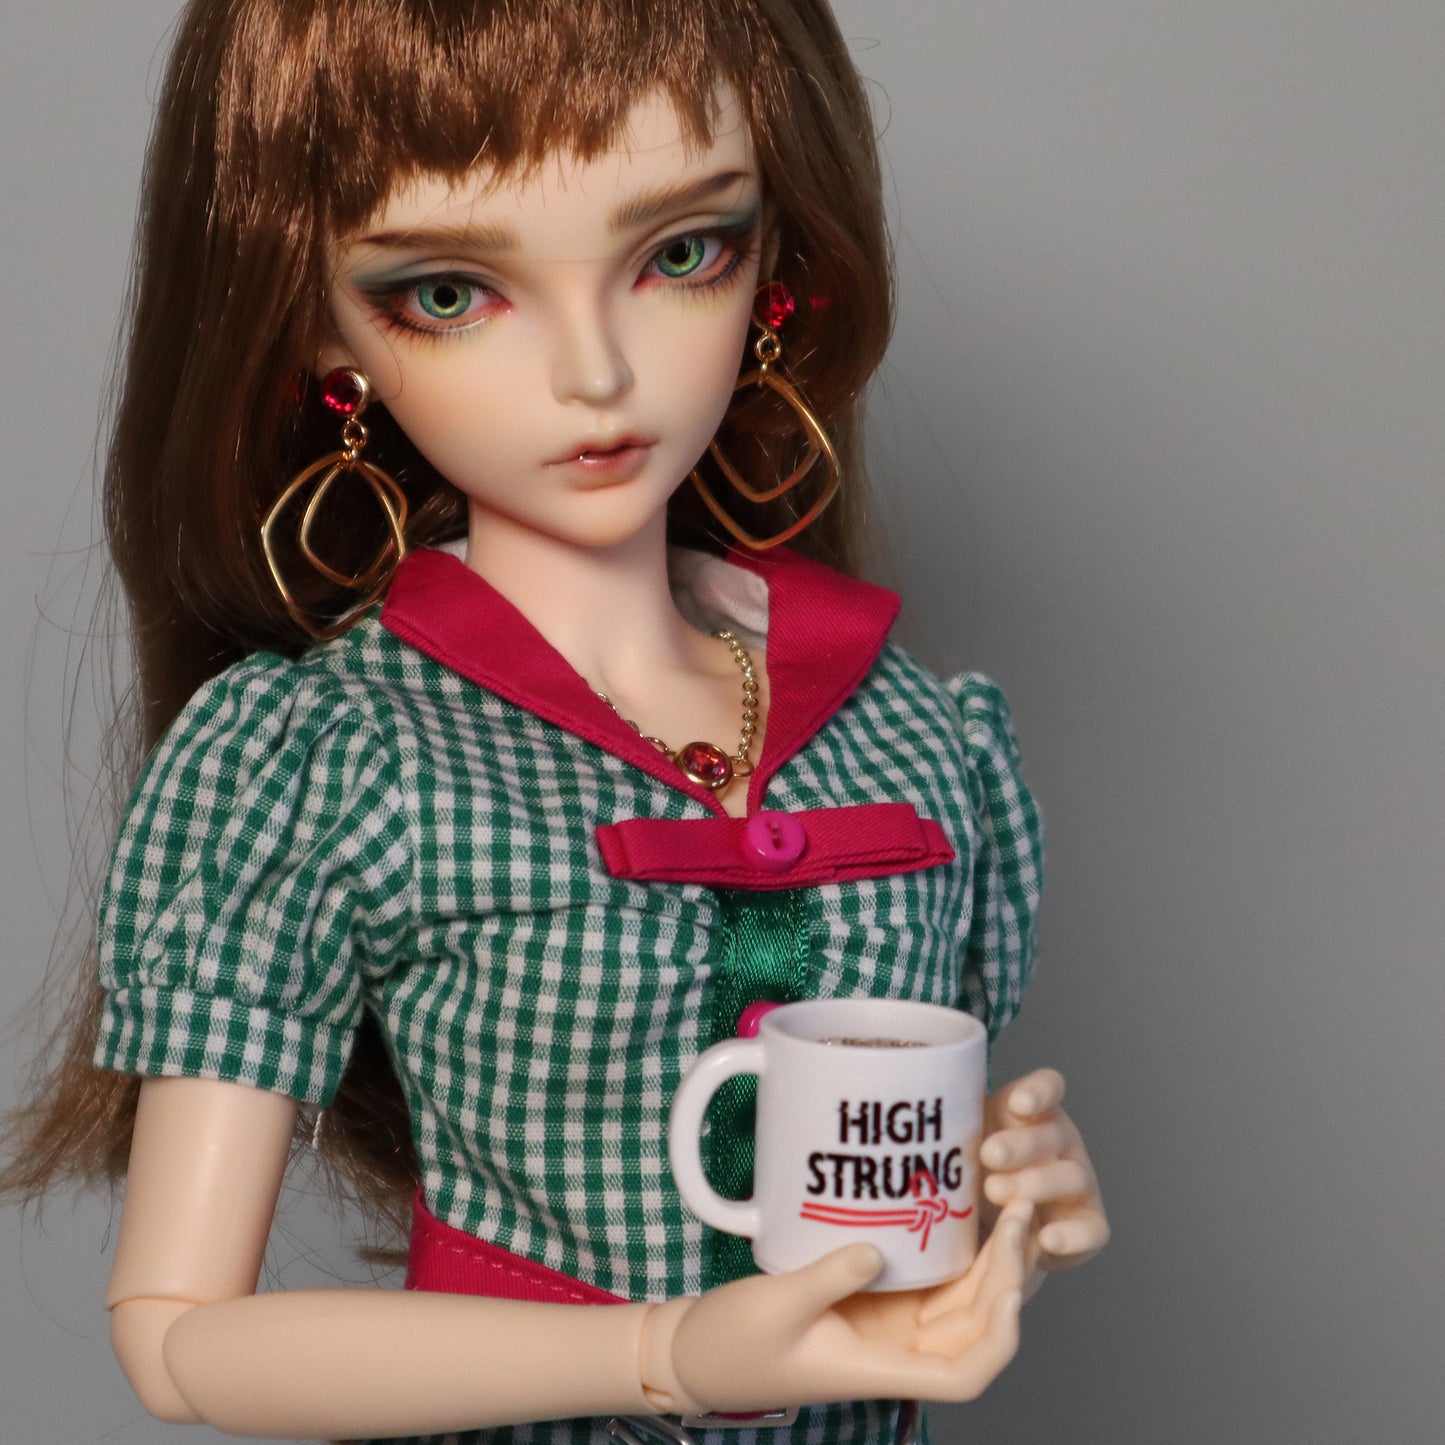 1/4 Scale Prop Set for BJD - Novelty Mug w/ Inserts - 5 designs to choose from